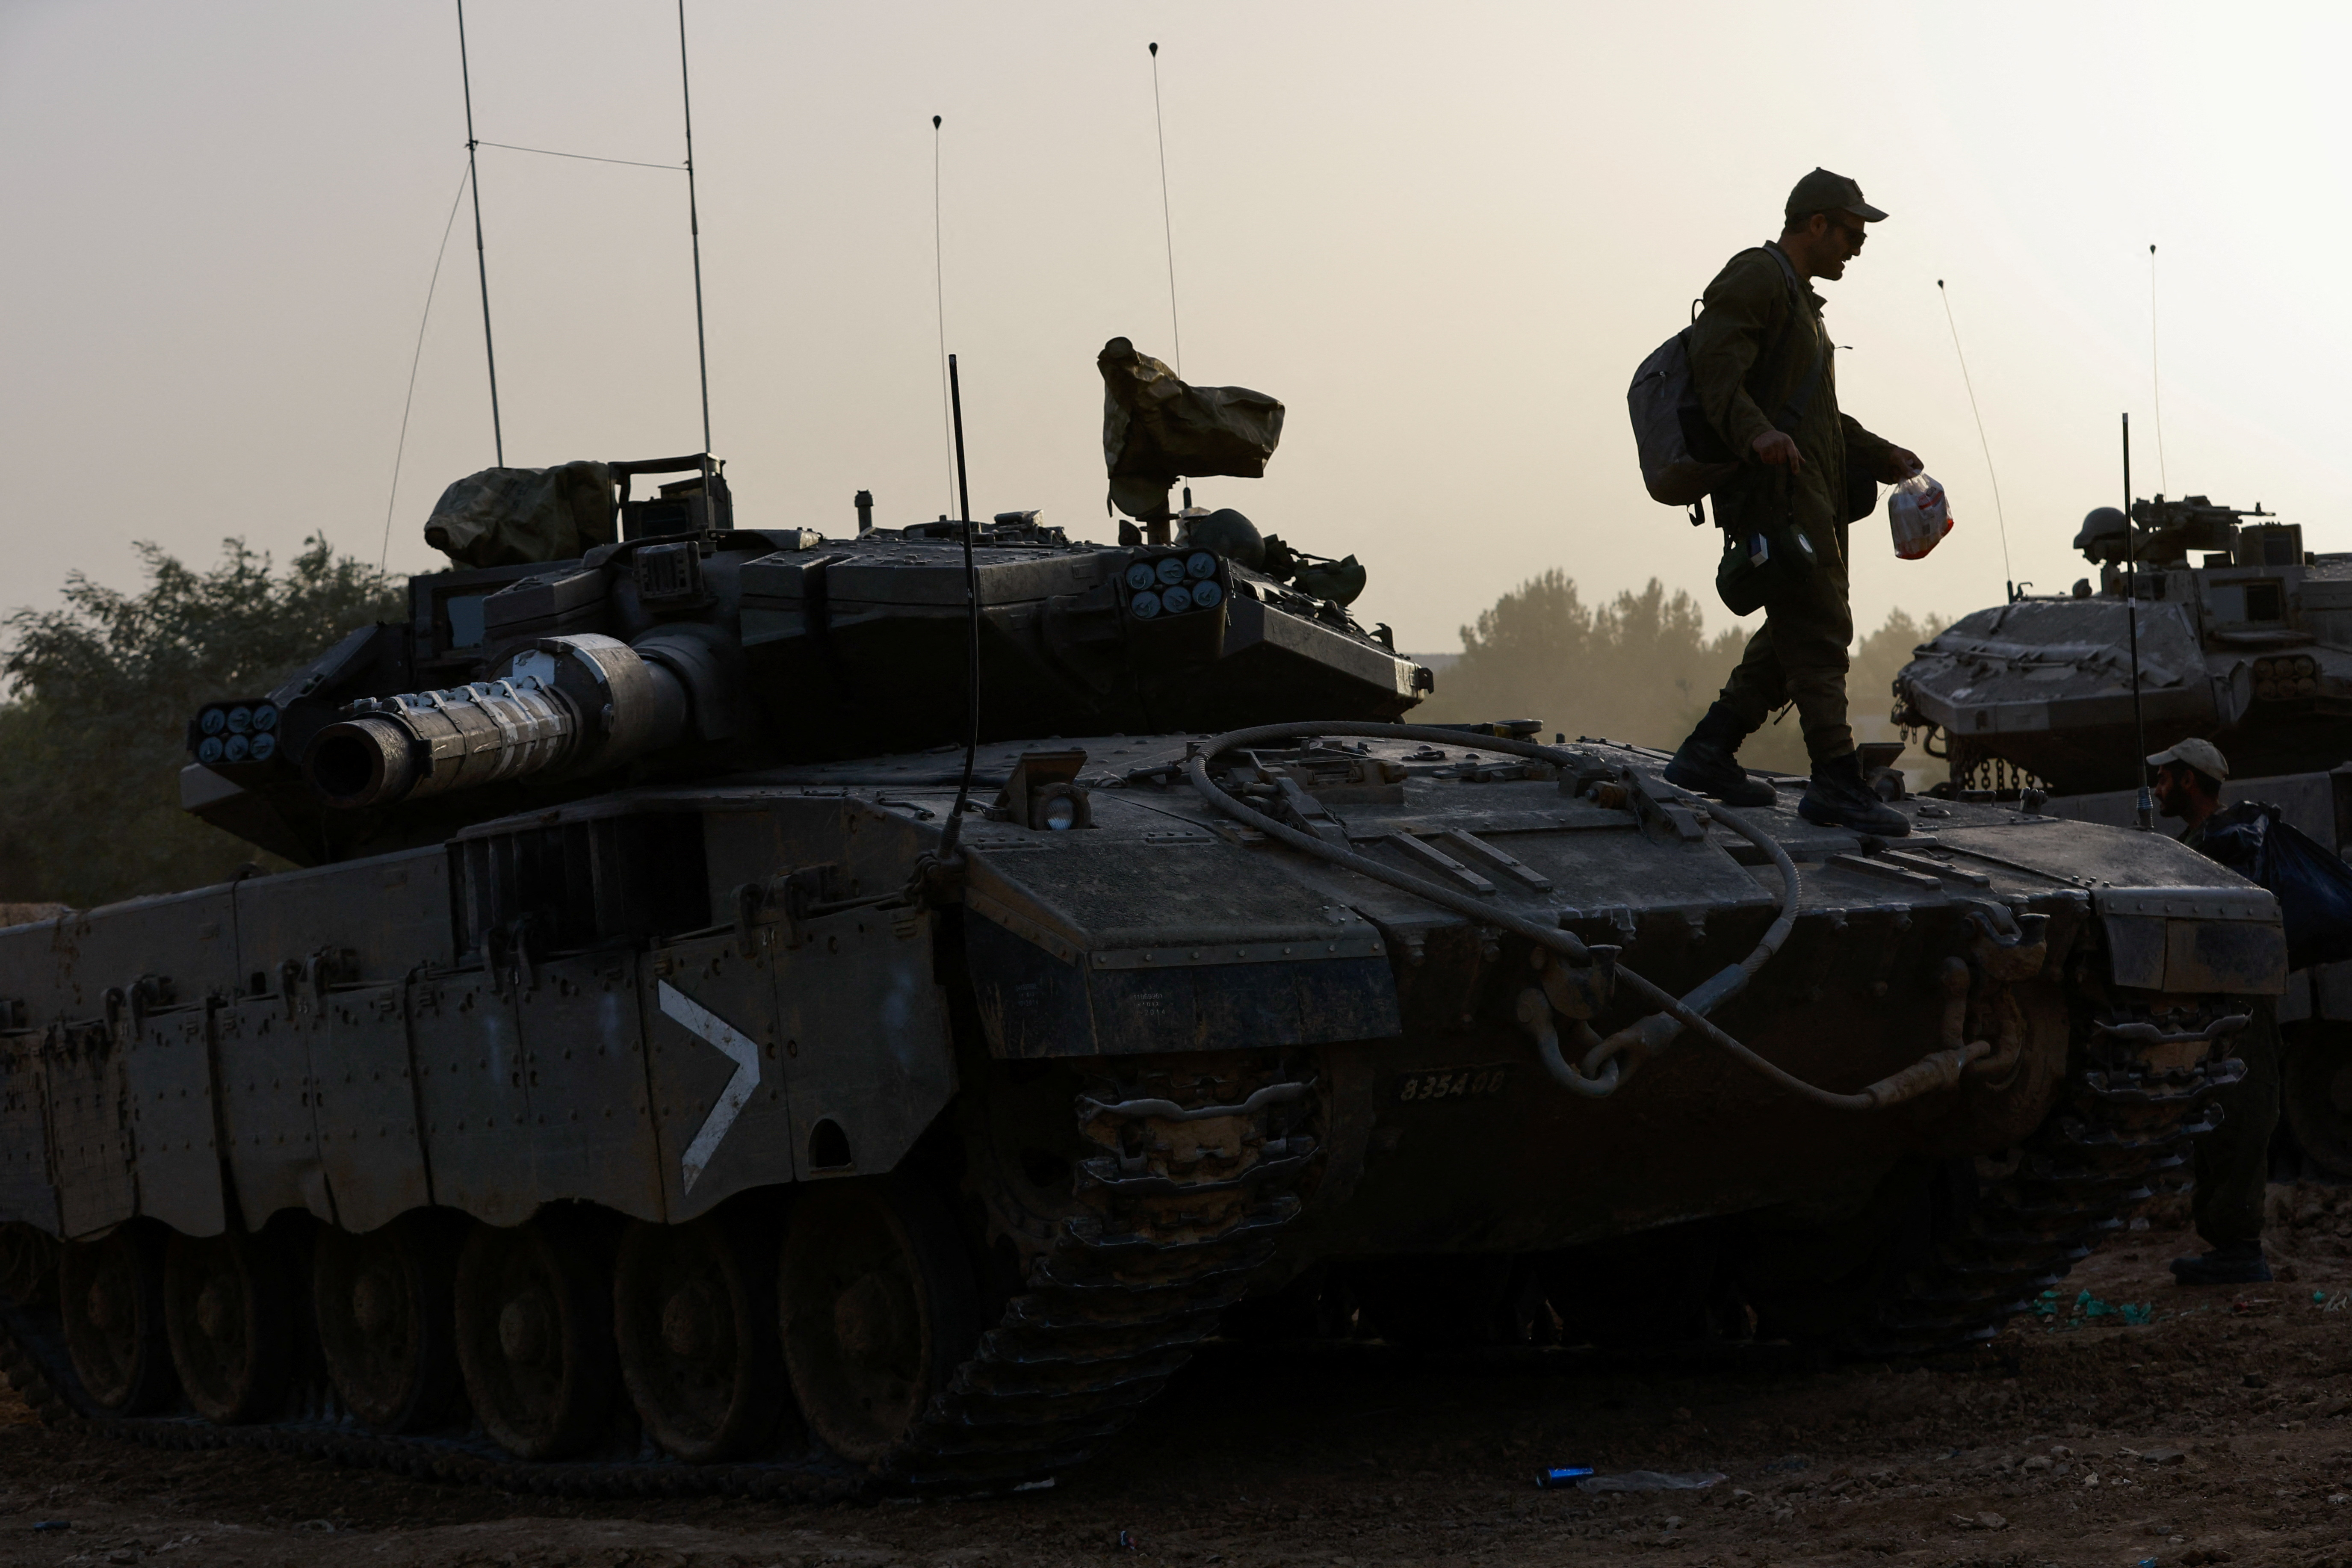 An Israeli soldier walks on a tank near the Israel-Gaza border during a temporary truce between Hamas and Israel